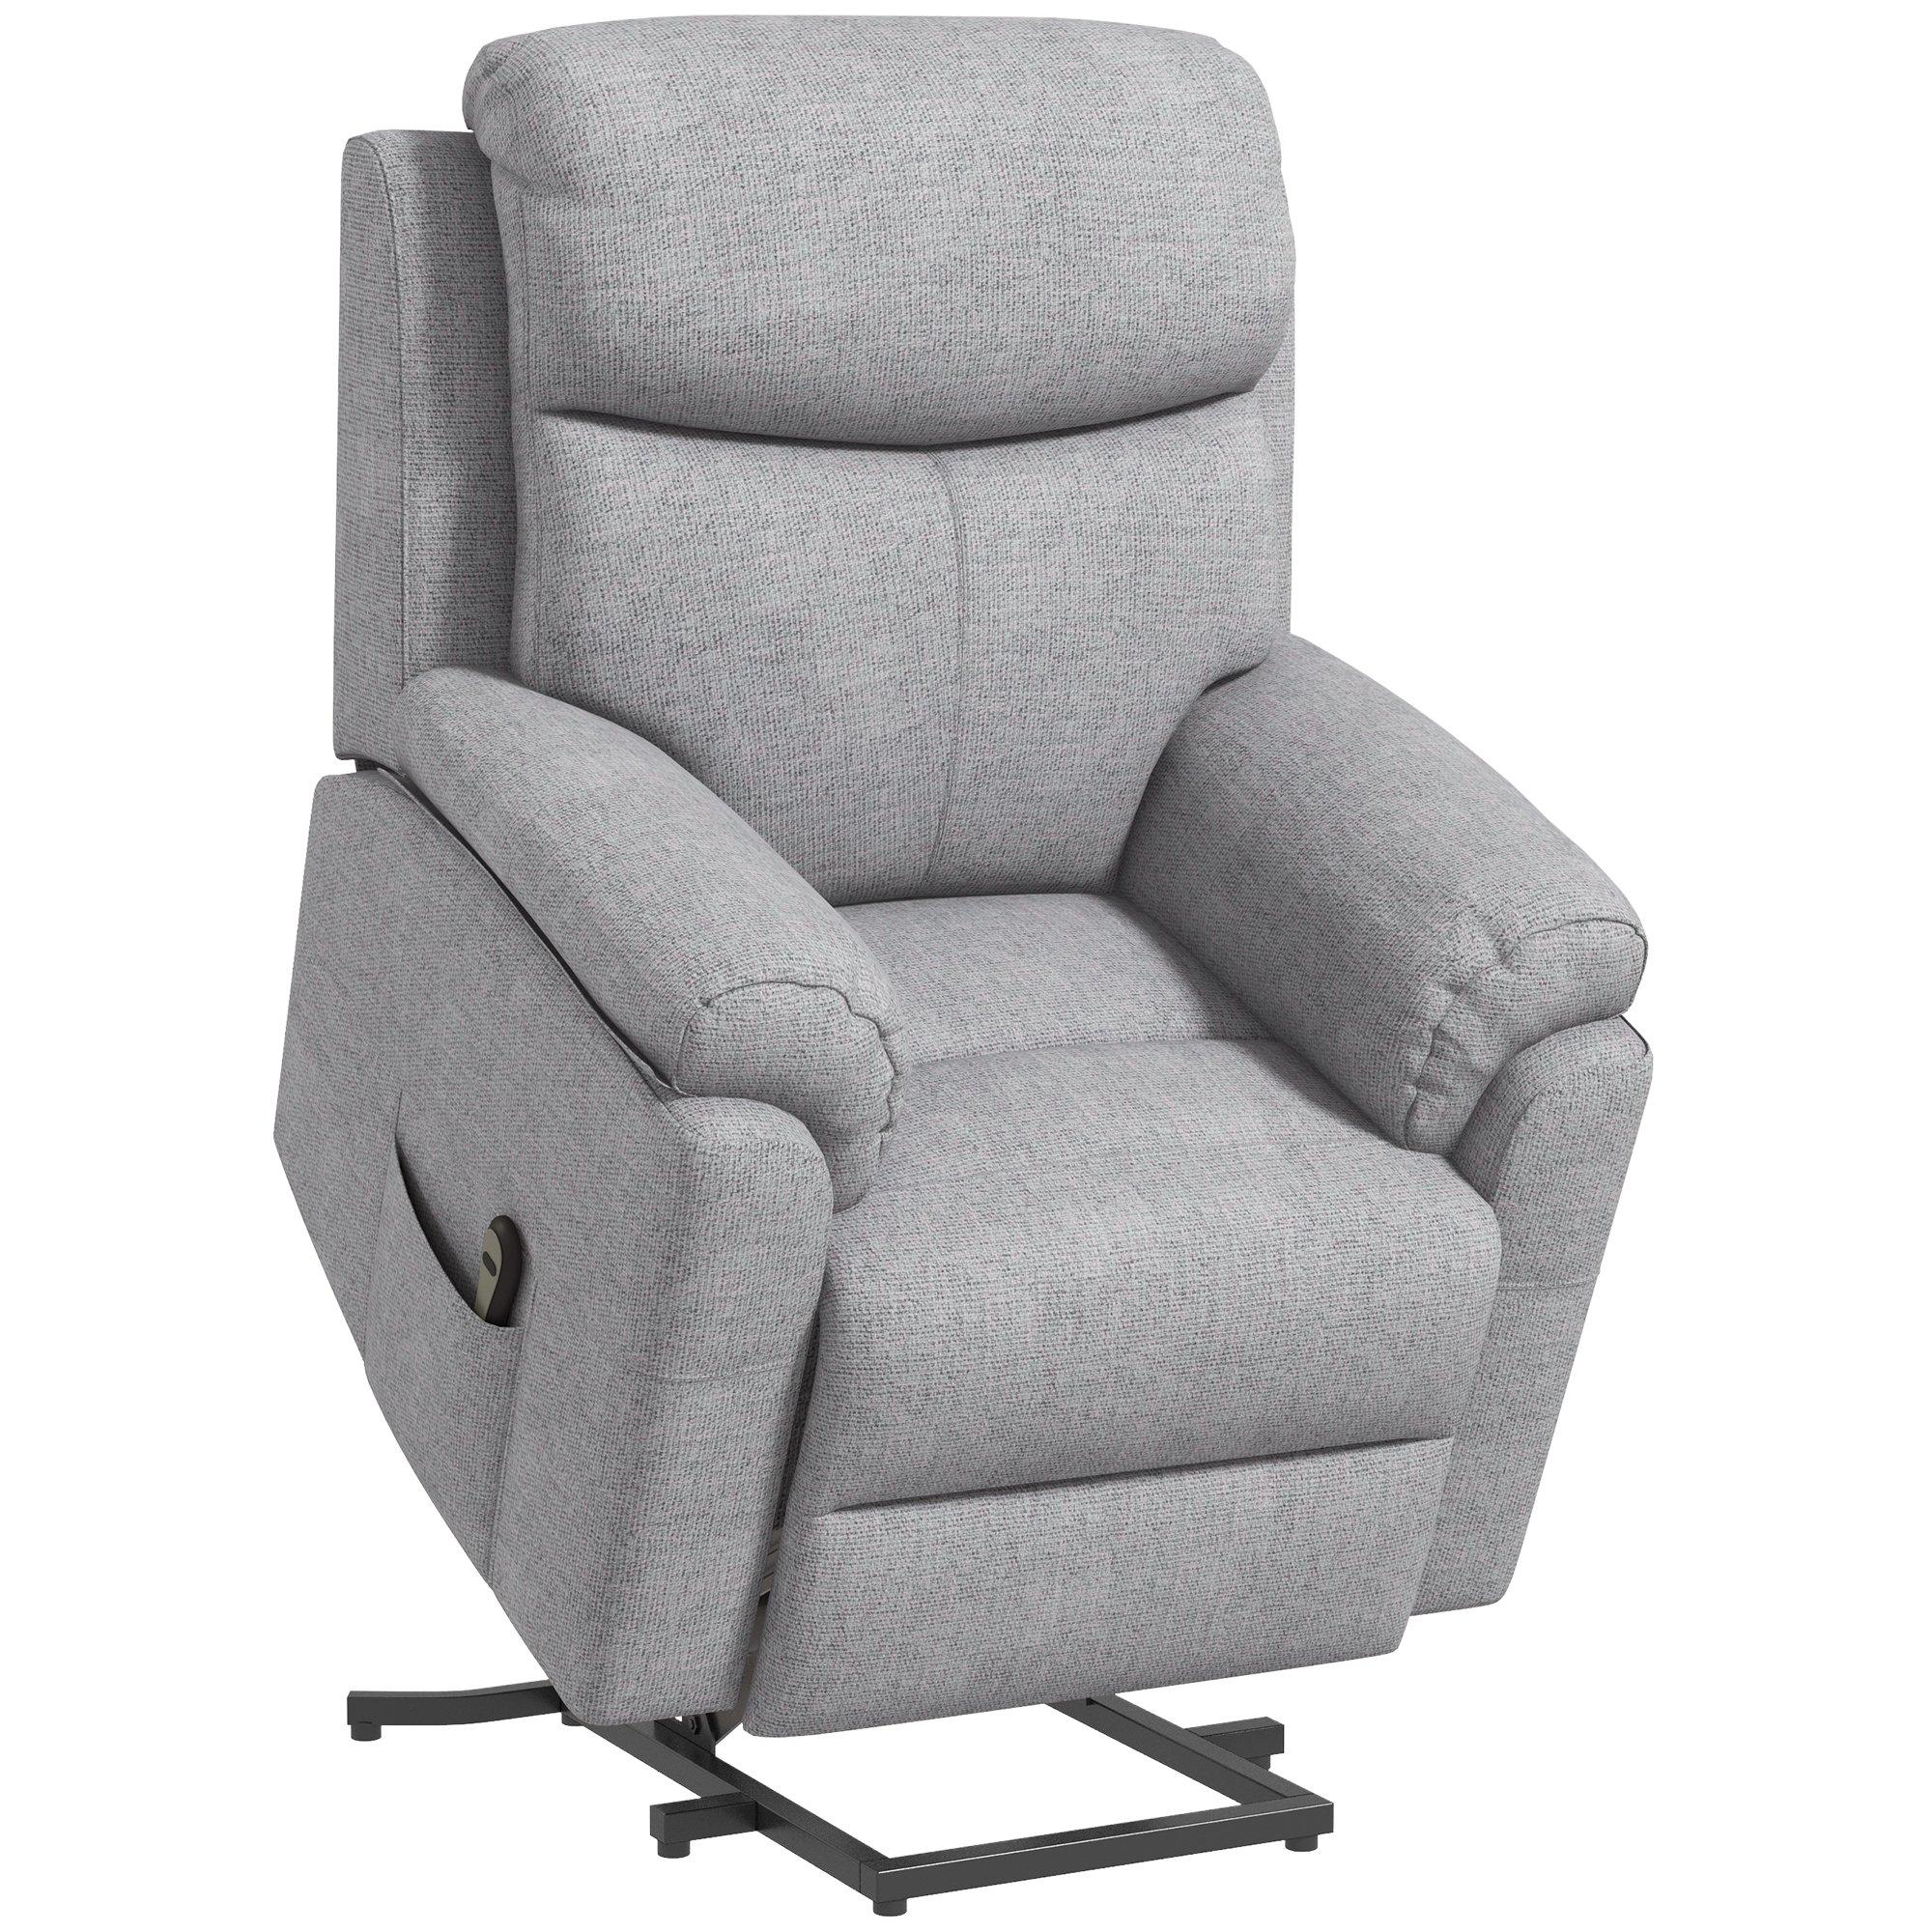 Power Lift Chair Electric Riser Recliner with Remote Control